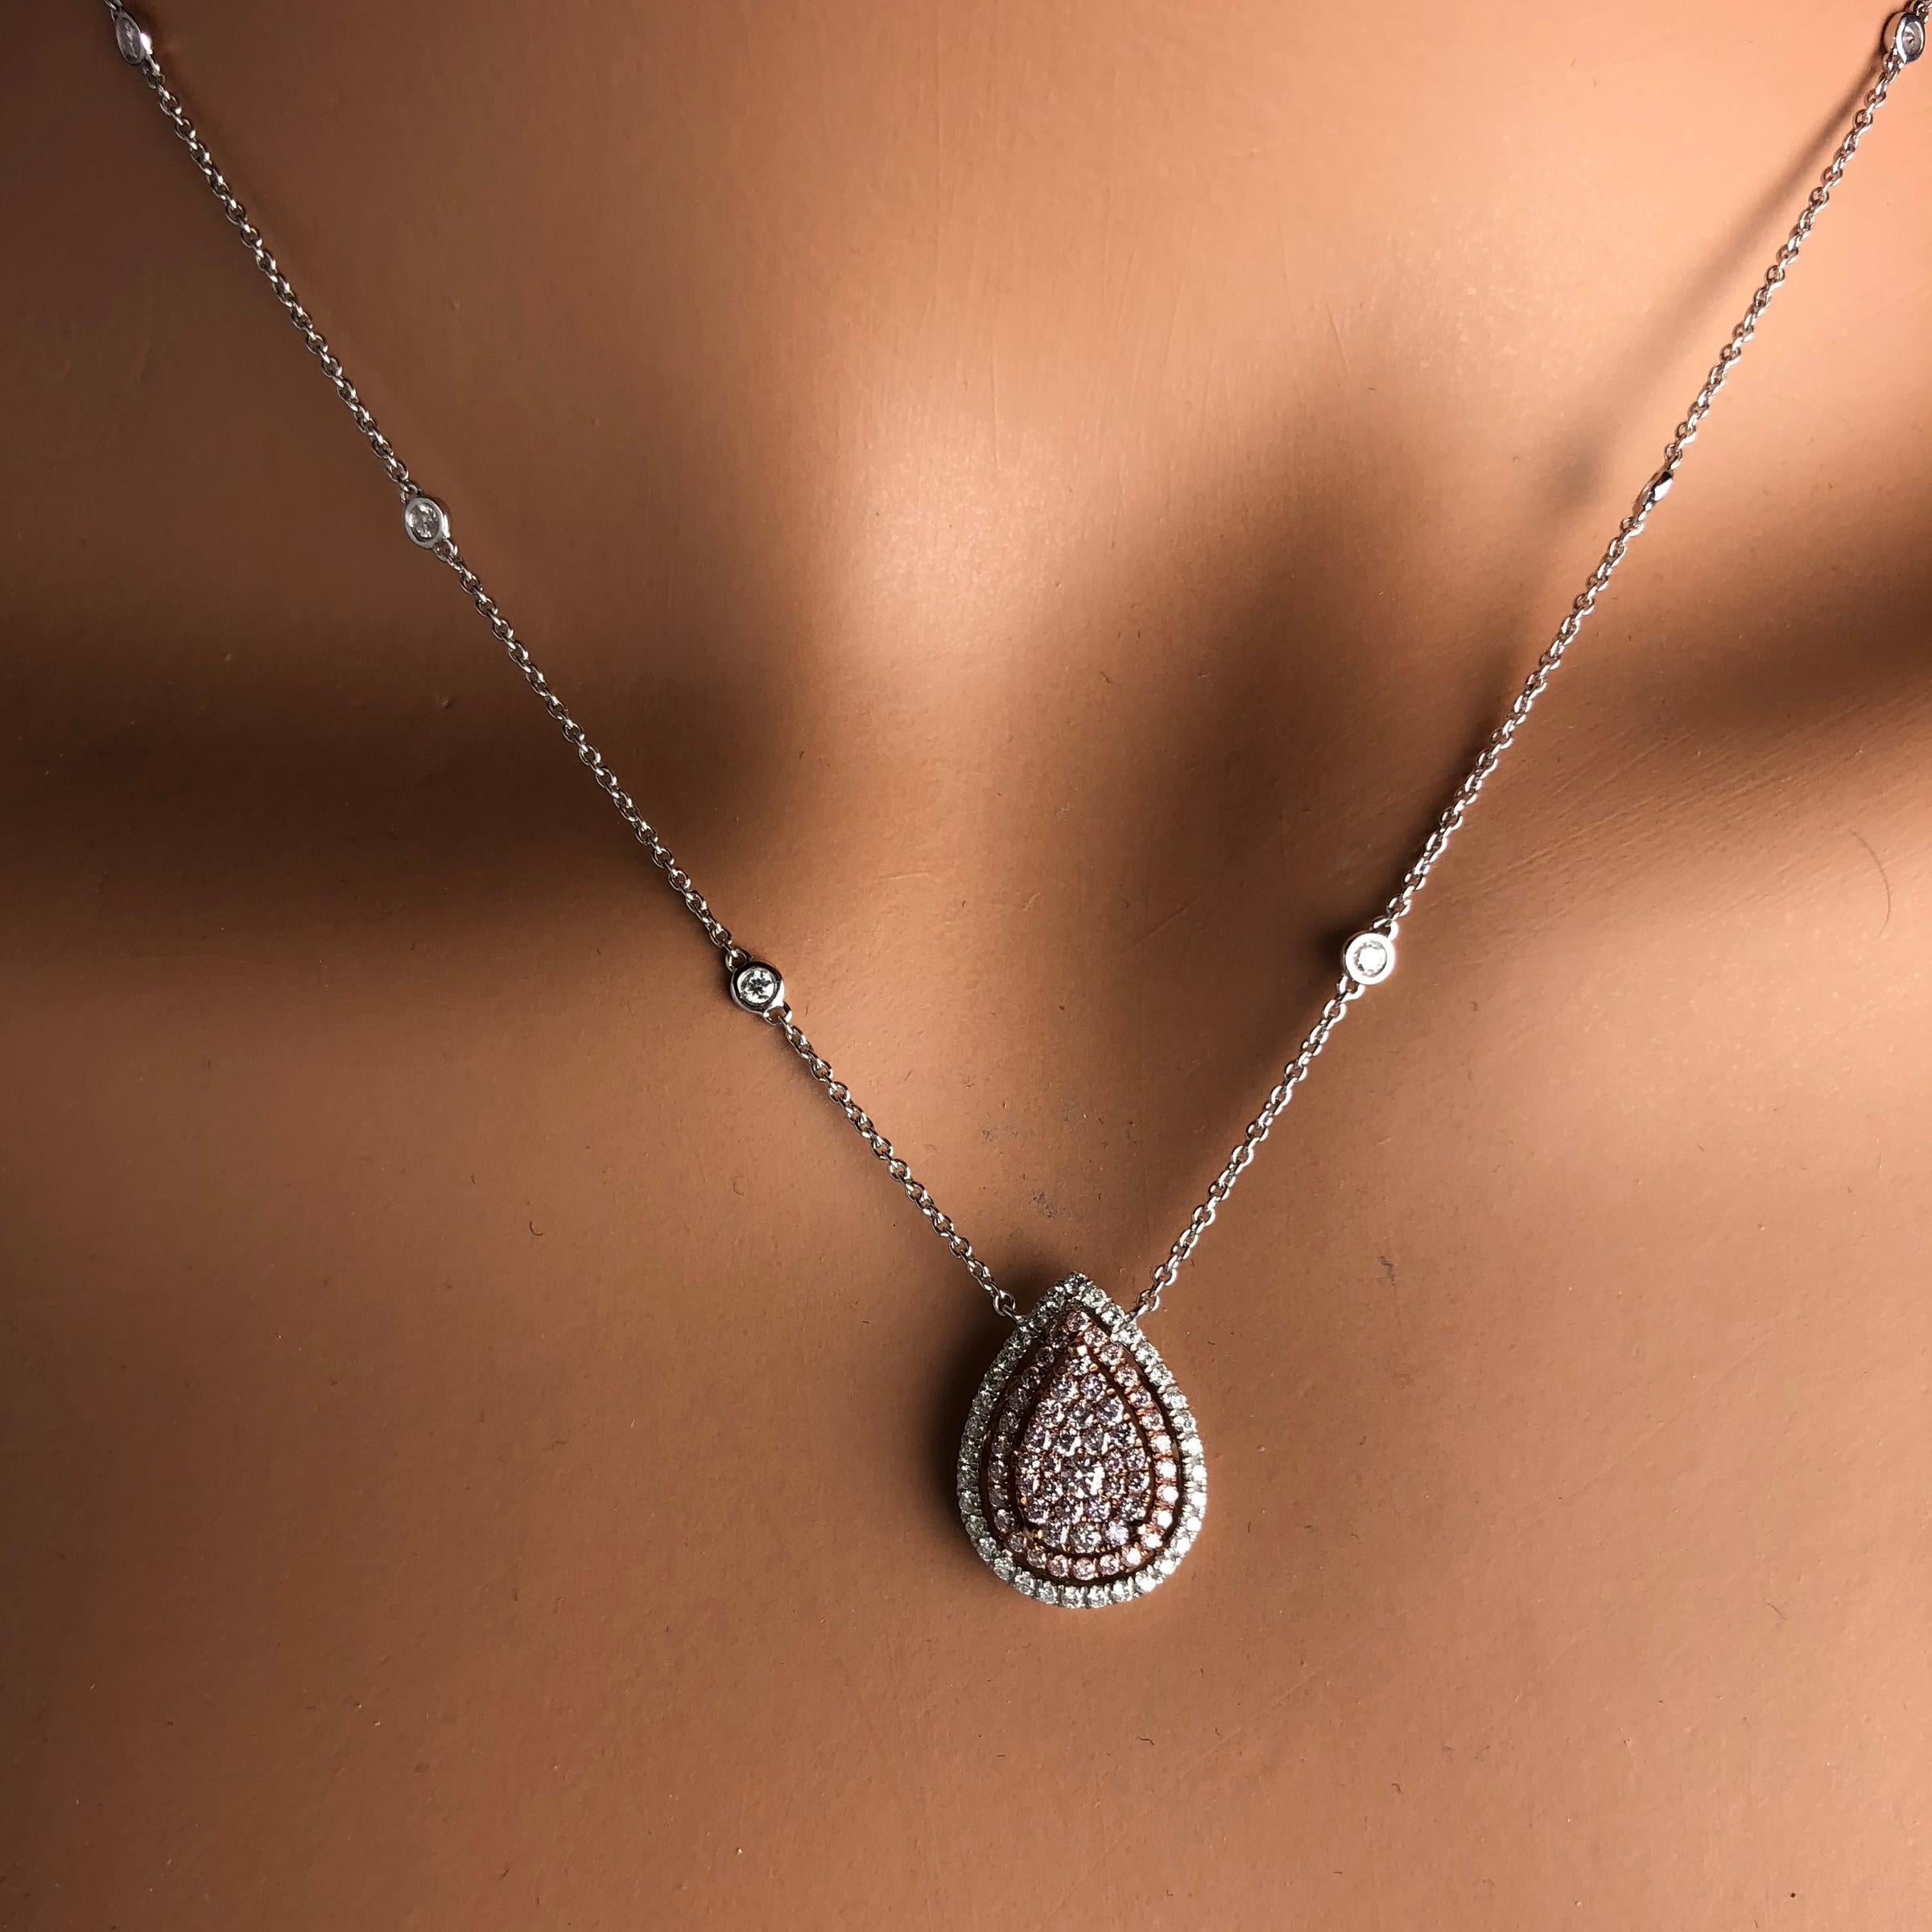 (DiamondTown) This gorgeous pendant features round pink diamonds carefully arranged to give the impression of a pear shaped center. This is surrounded by a double halo of round pink and round white diamonds, as well as diamonds placed along the